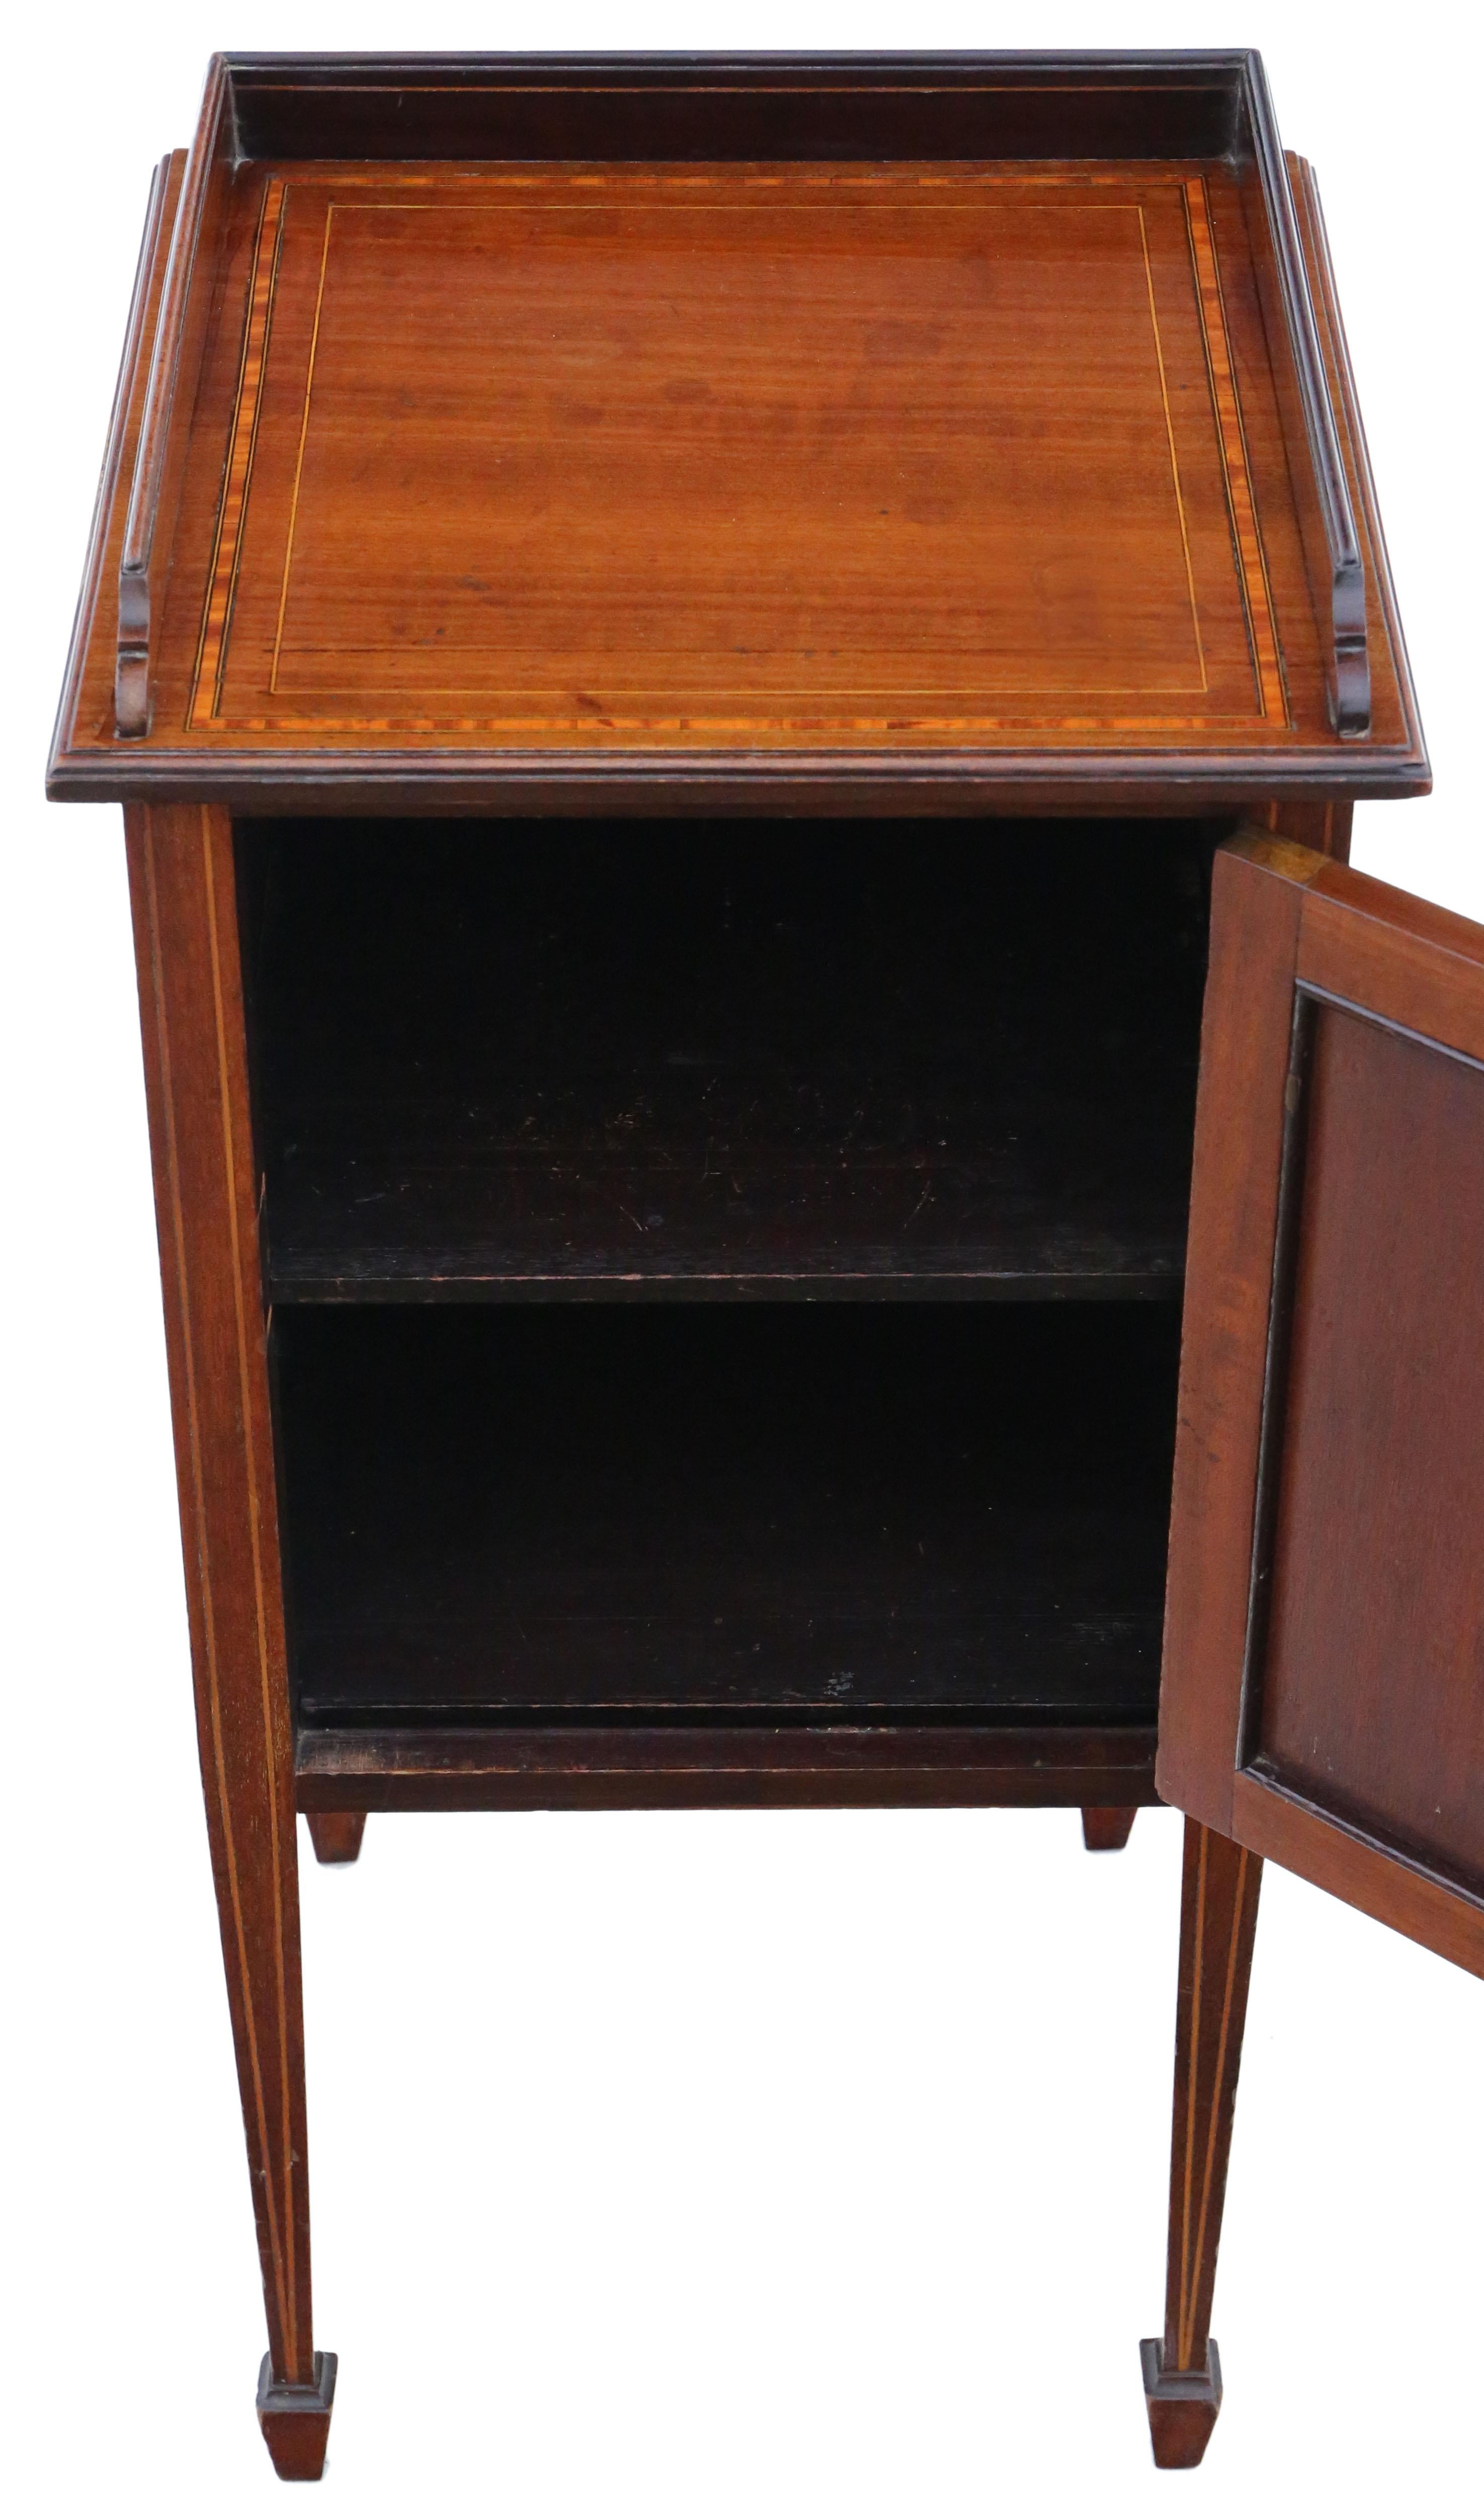 Antique Fine Quality Tray Top Inlaid Mahogany Bedside Table Cupboard In Good Condition For Sale In Wisbech, Cambridgeshire